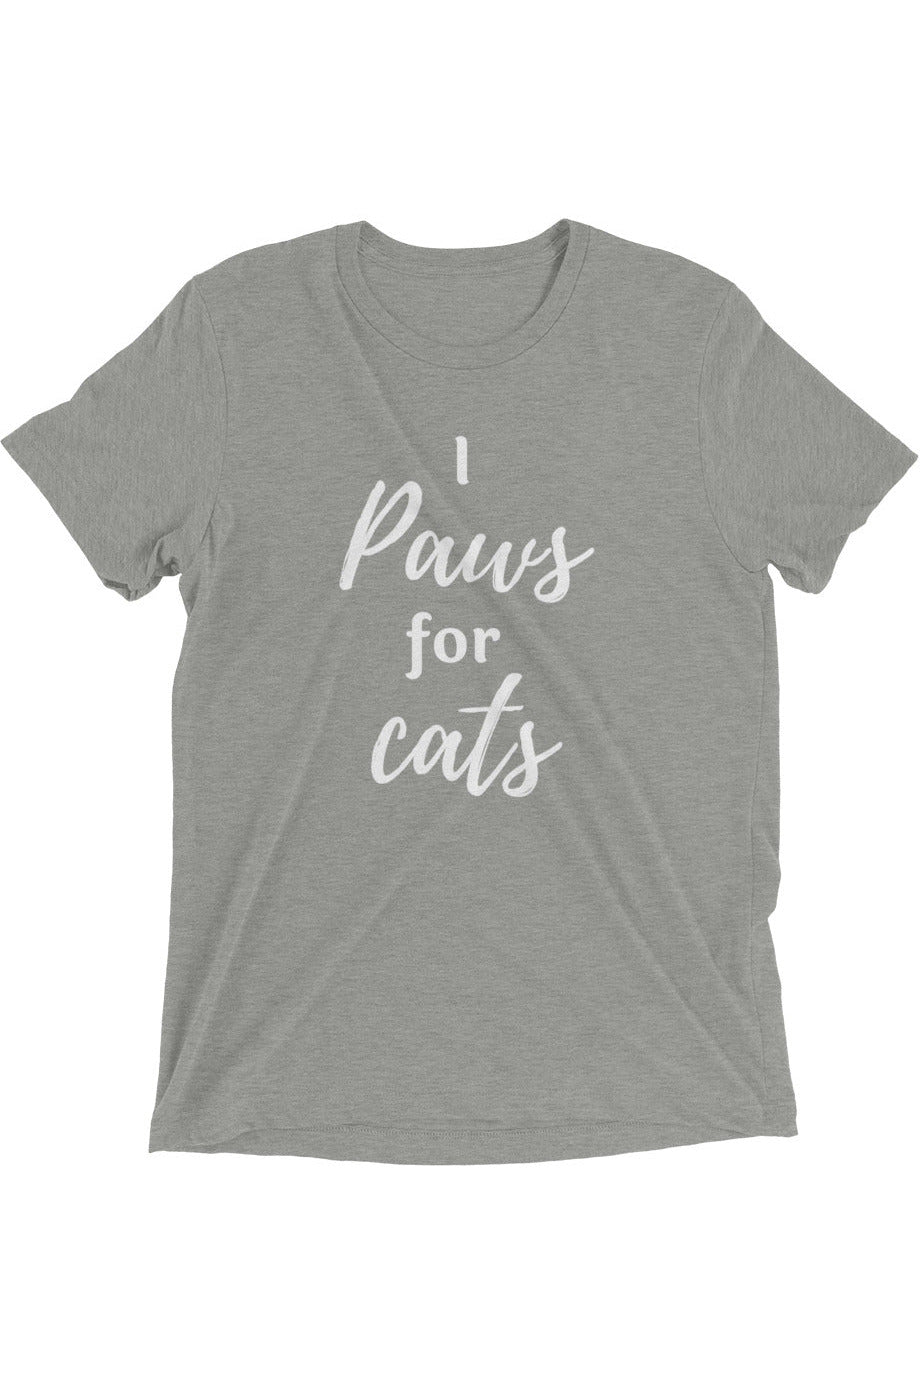 "Paws For Cats" - Short sleeve t-shirt